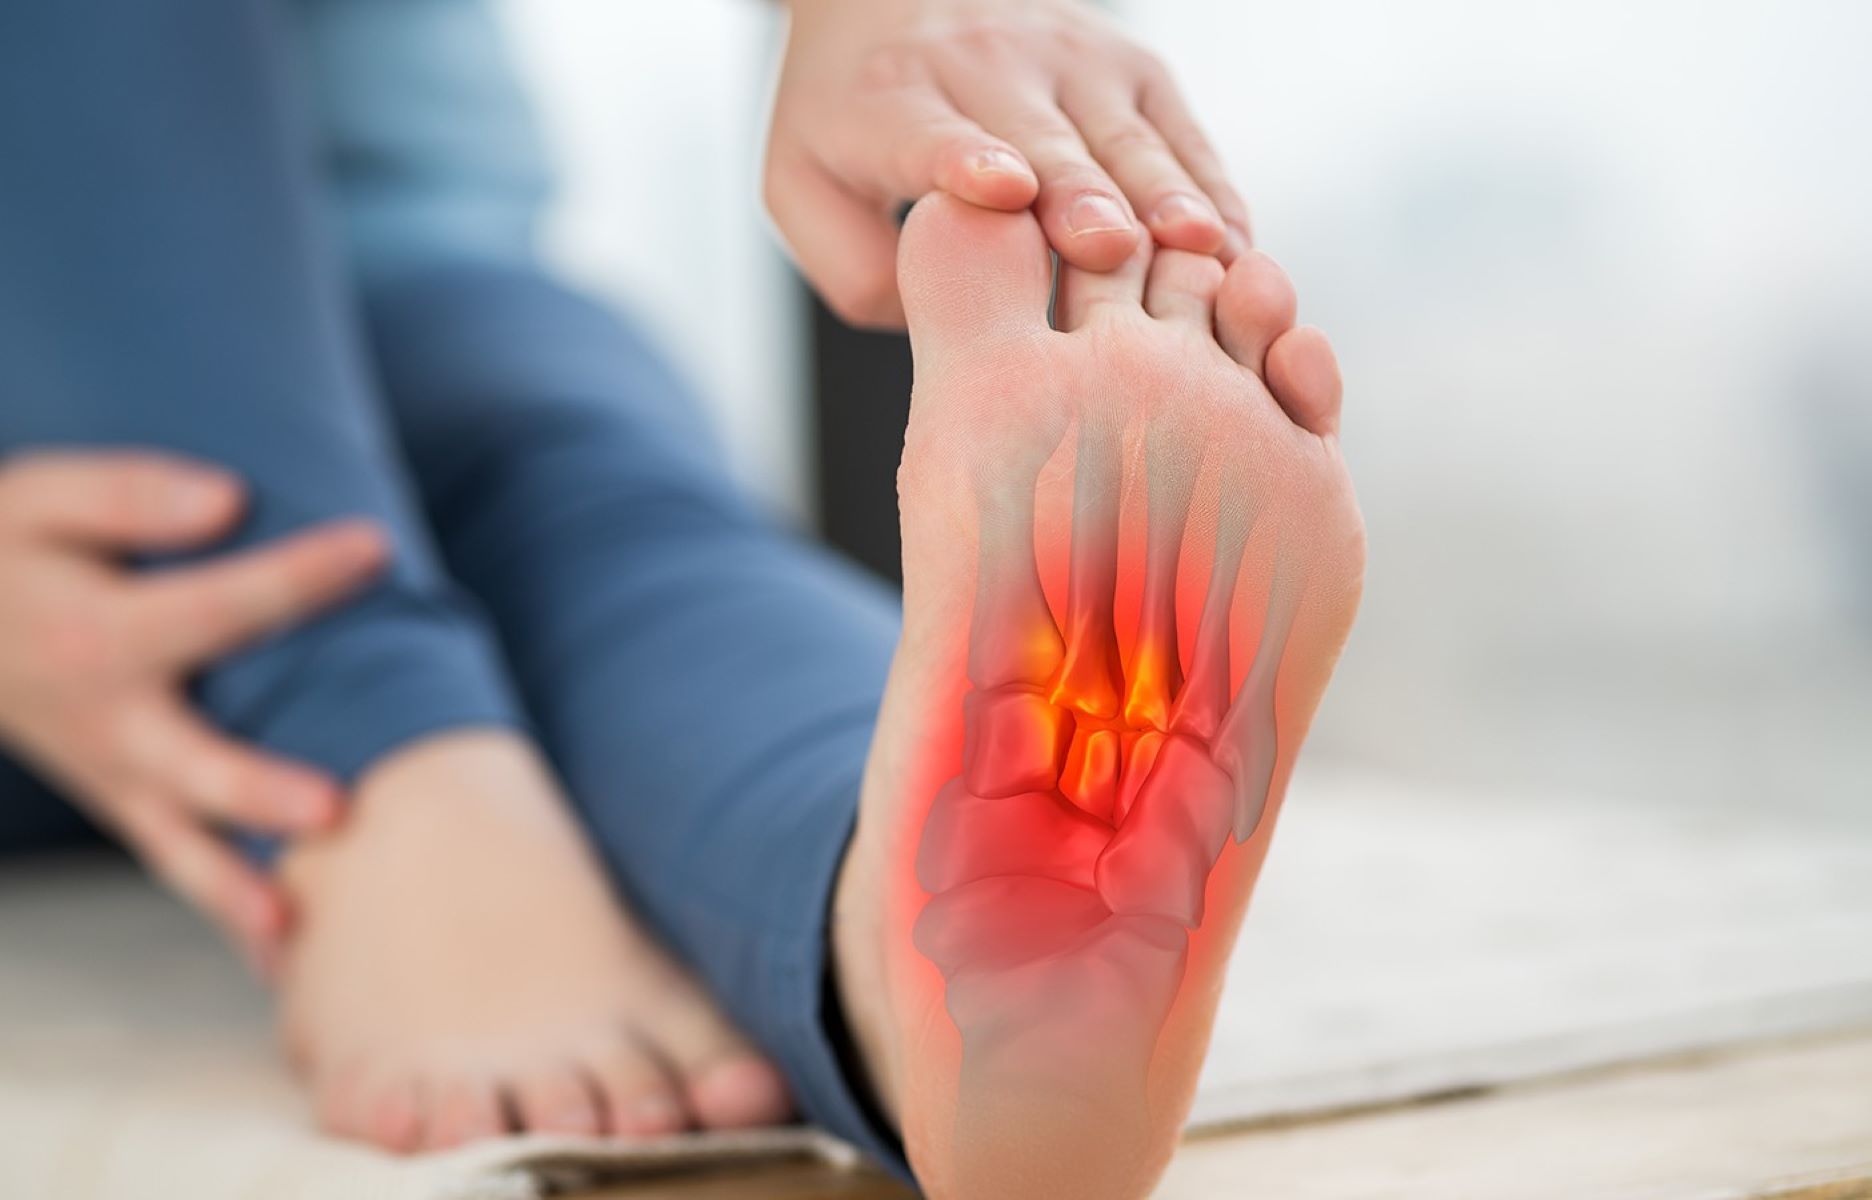 Effective Exercises And Treatment For Plantar Fasciitis